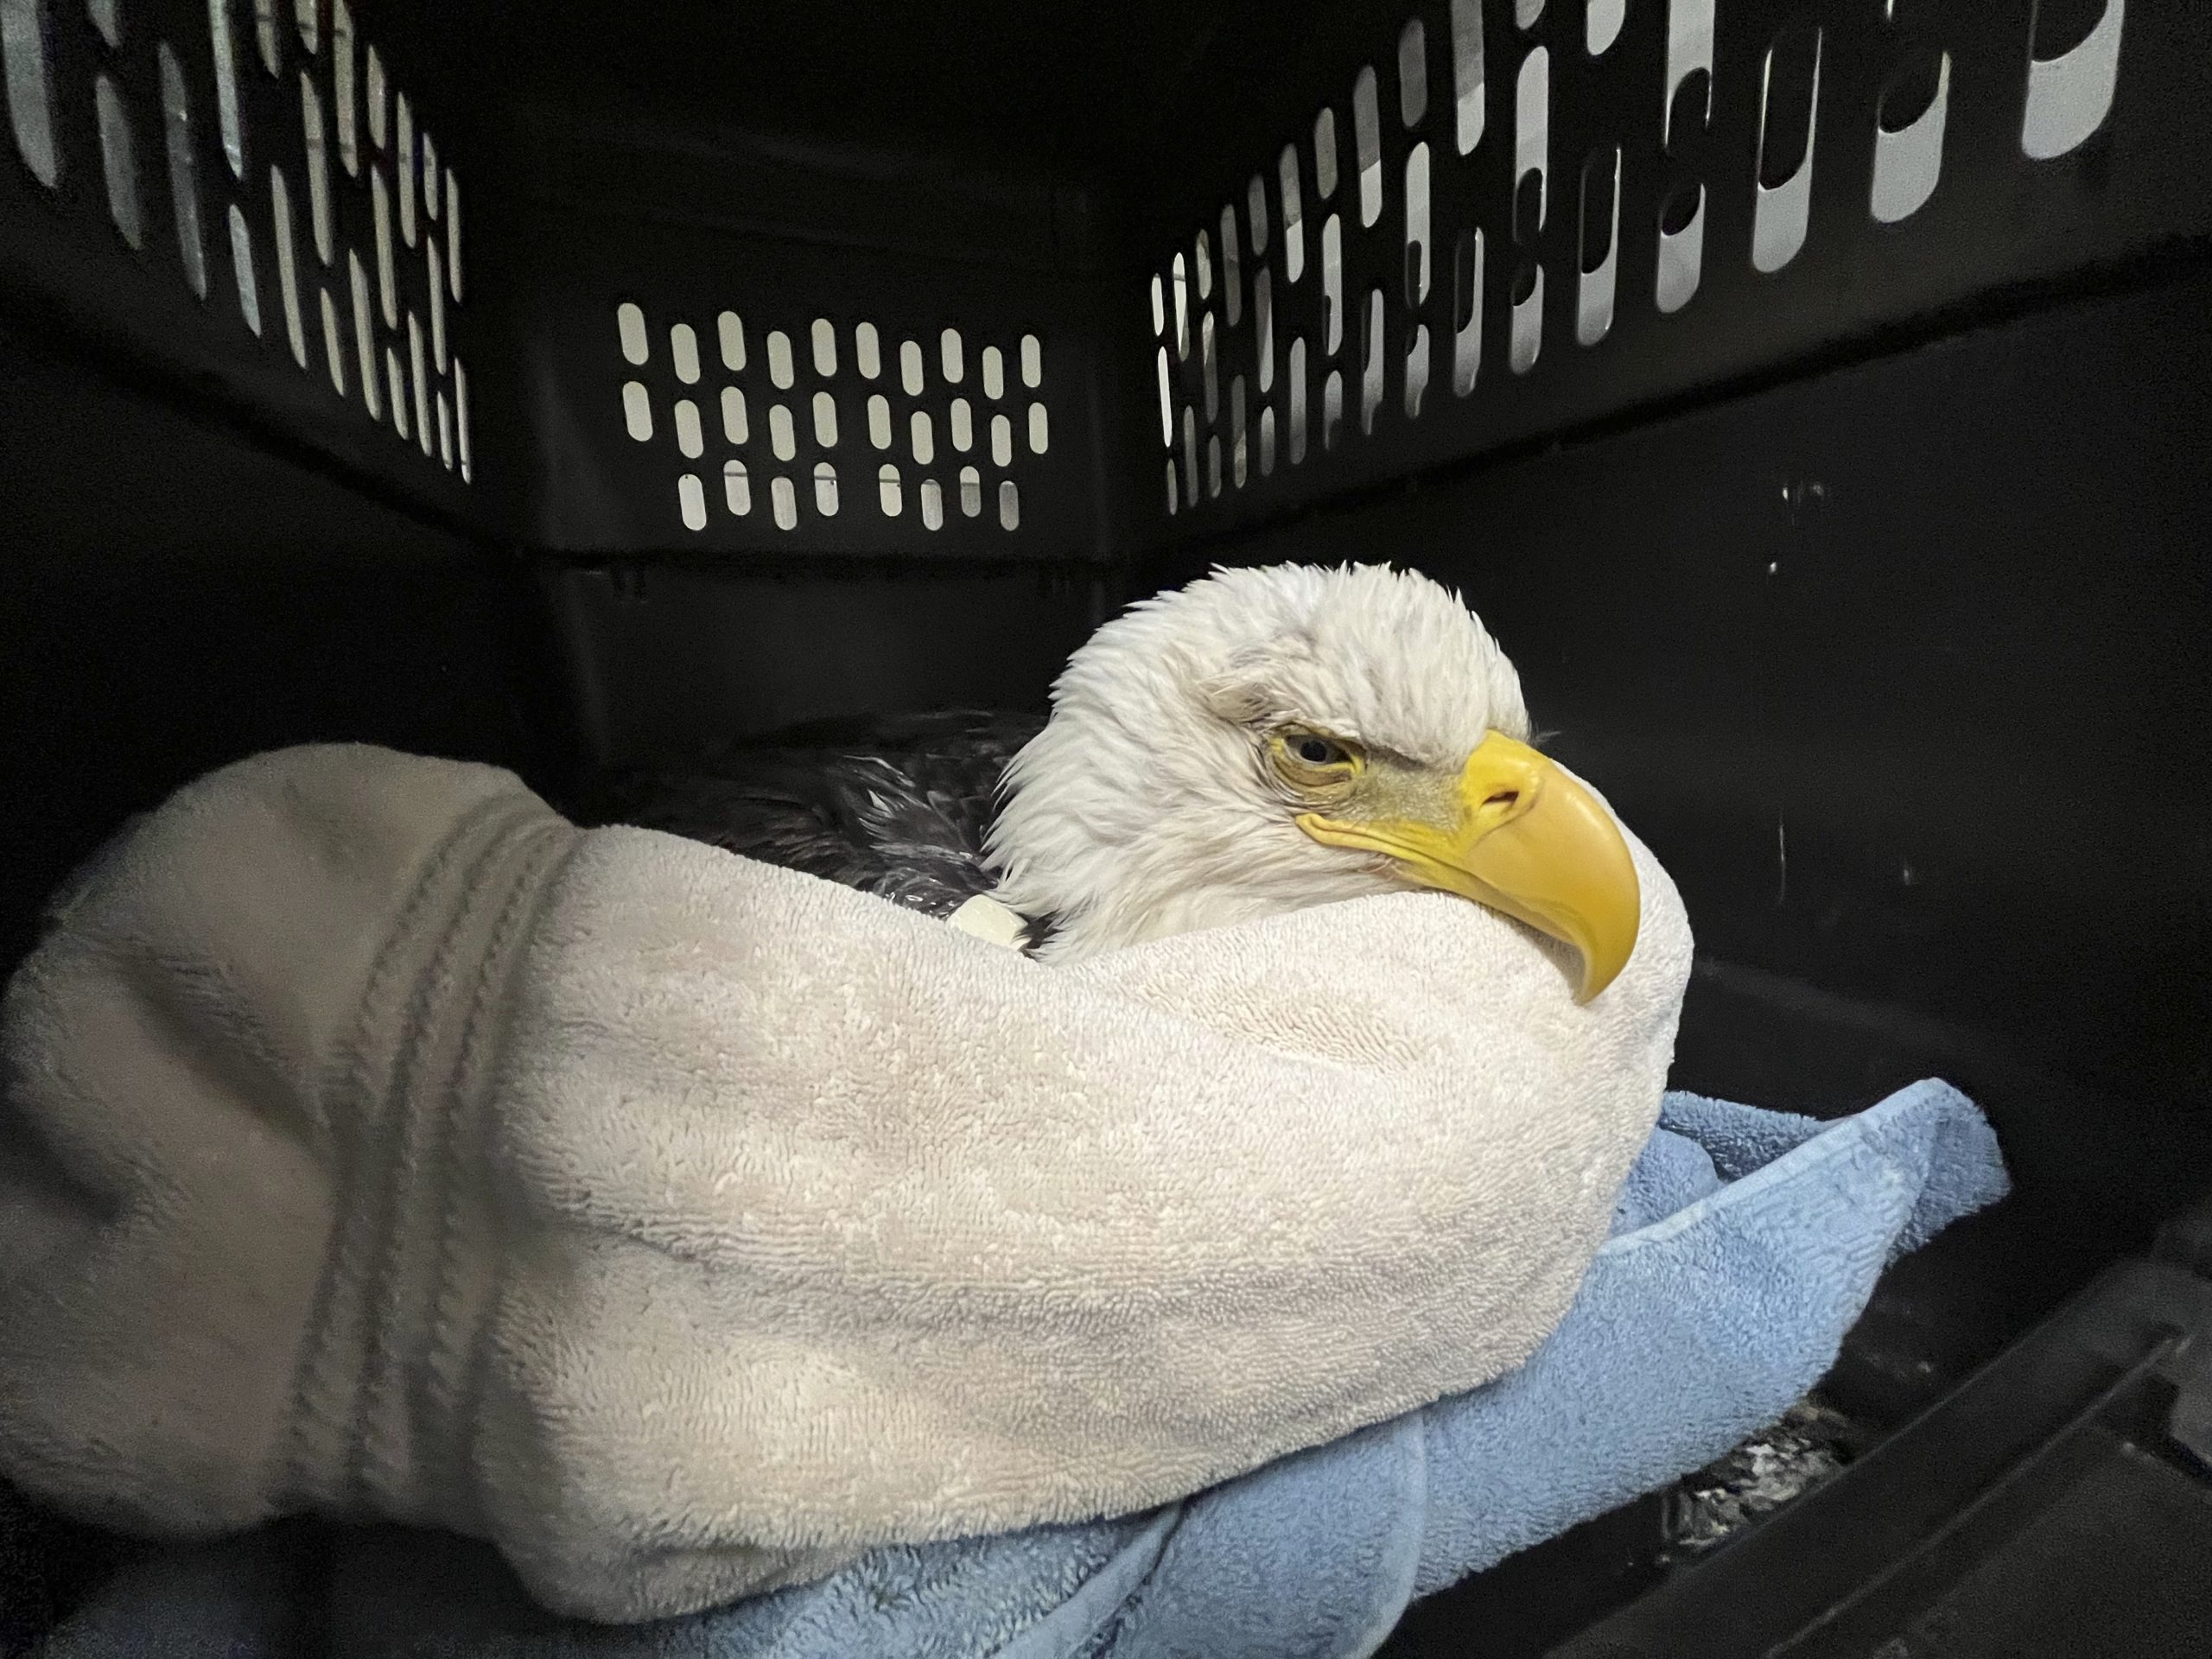 A bald eagle likely poisoned by scavenging the carcasses of euthanized animals that were improperly disposed of at a Minnesota landfill is seen at the University of Minnesota Raptor Center, in Minneapolis.